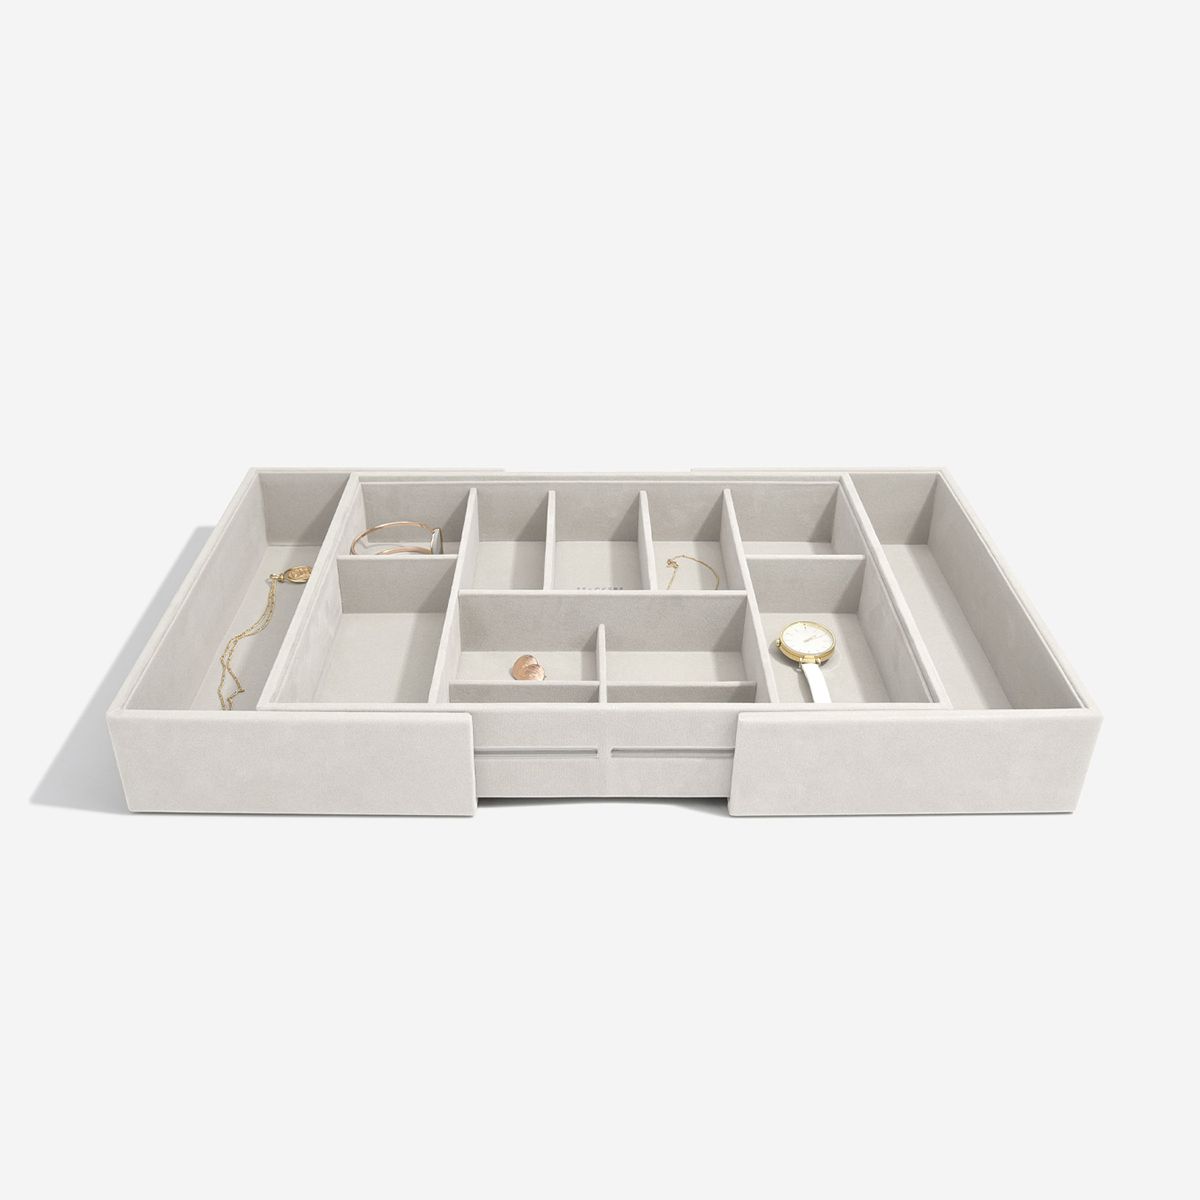 Stackers^ Jewelry Tray | The Container Store